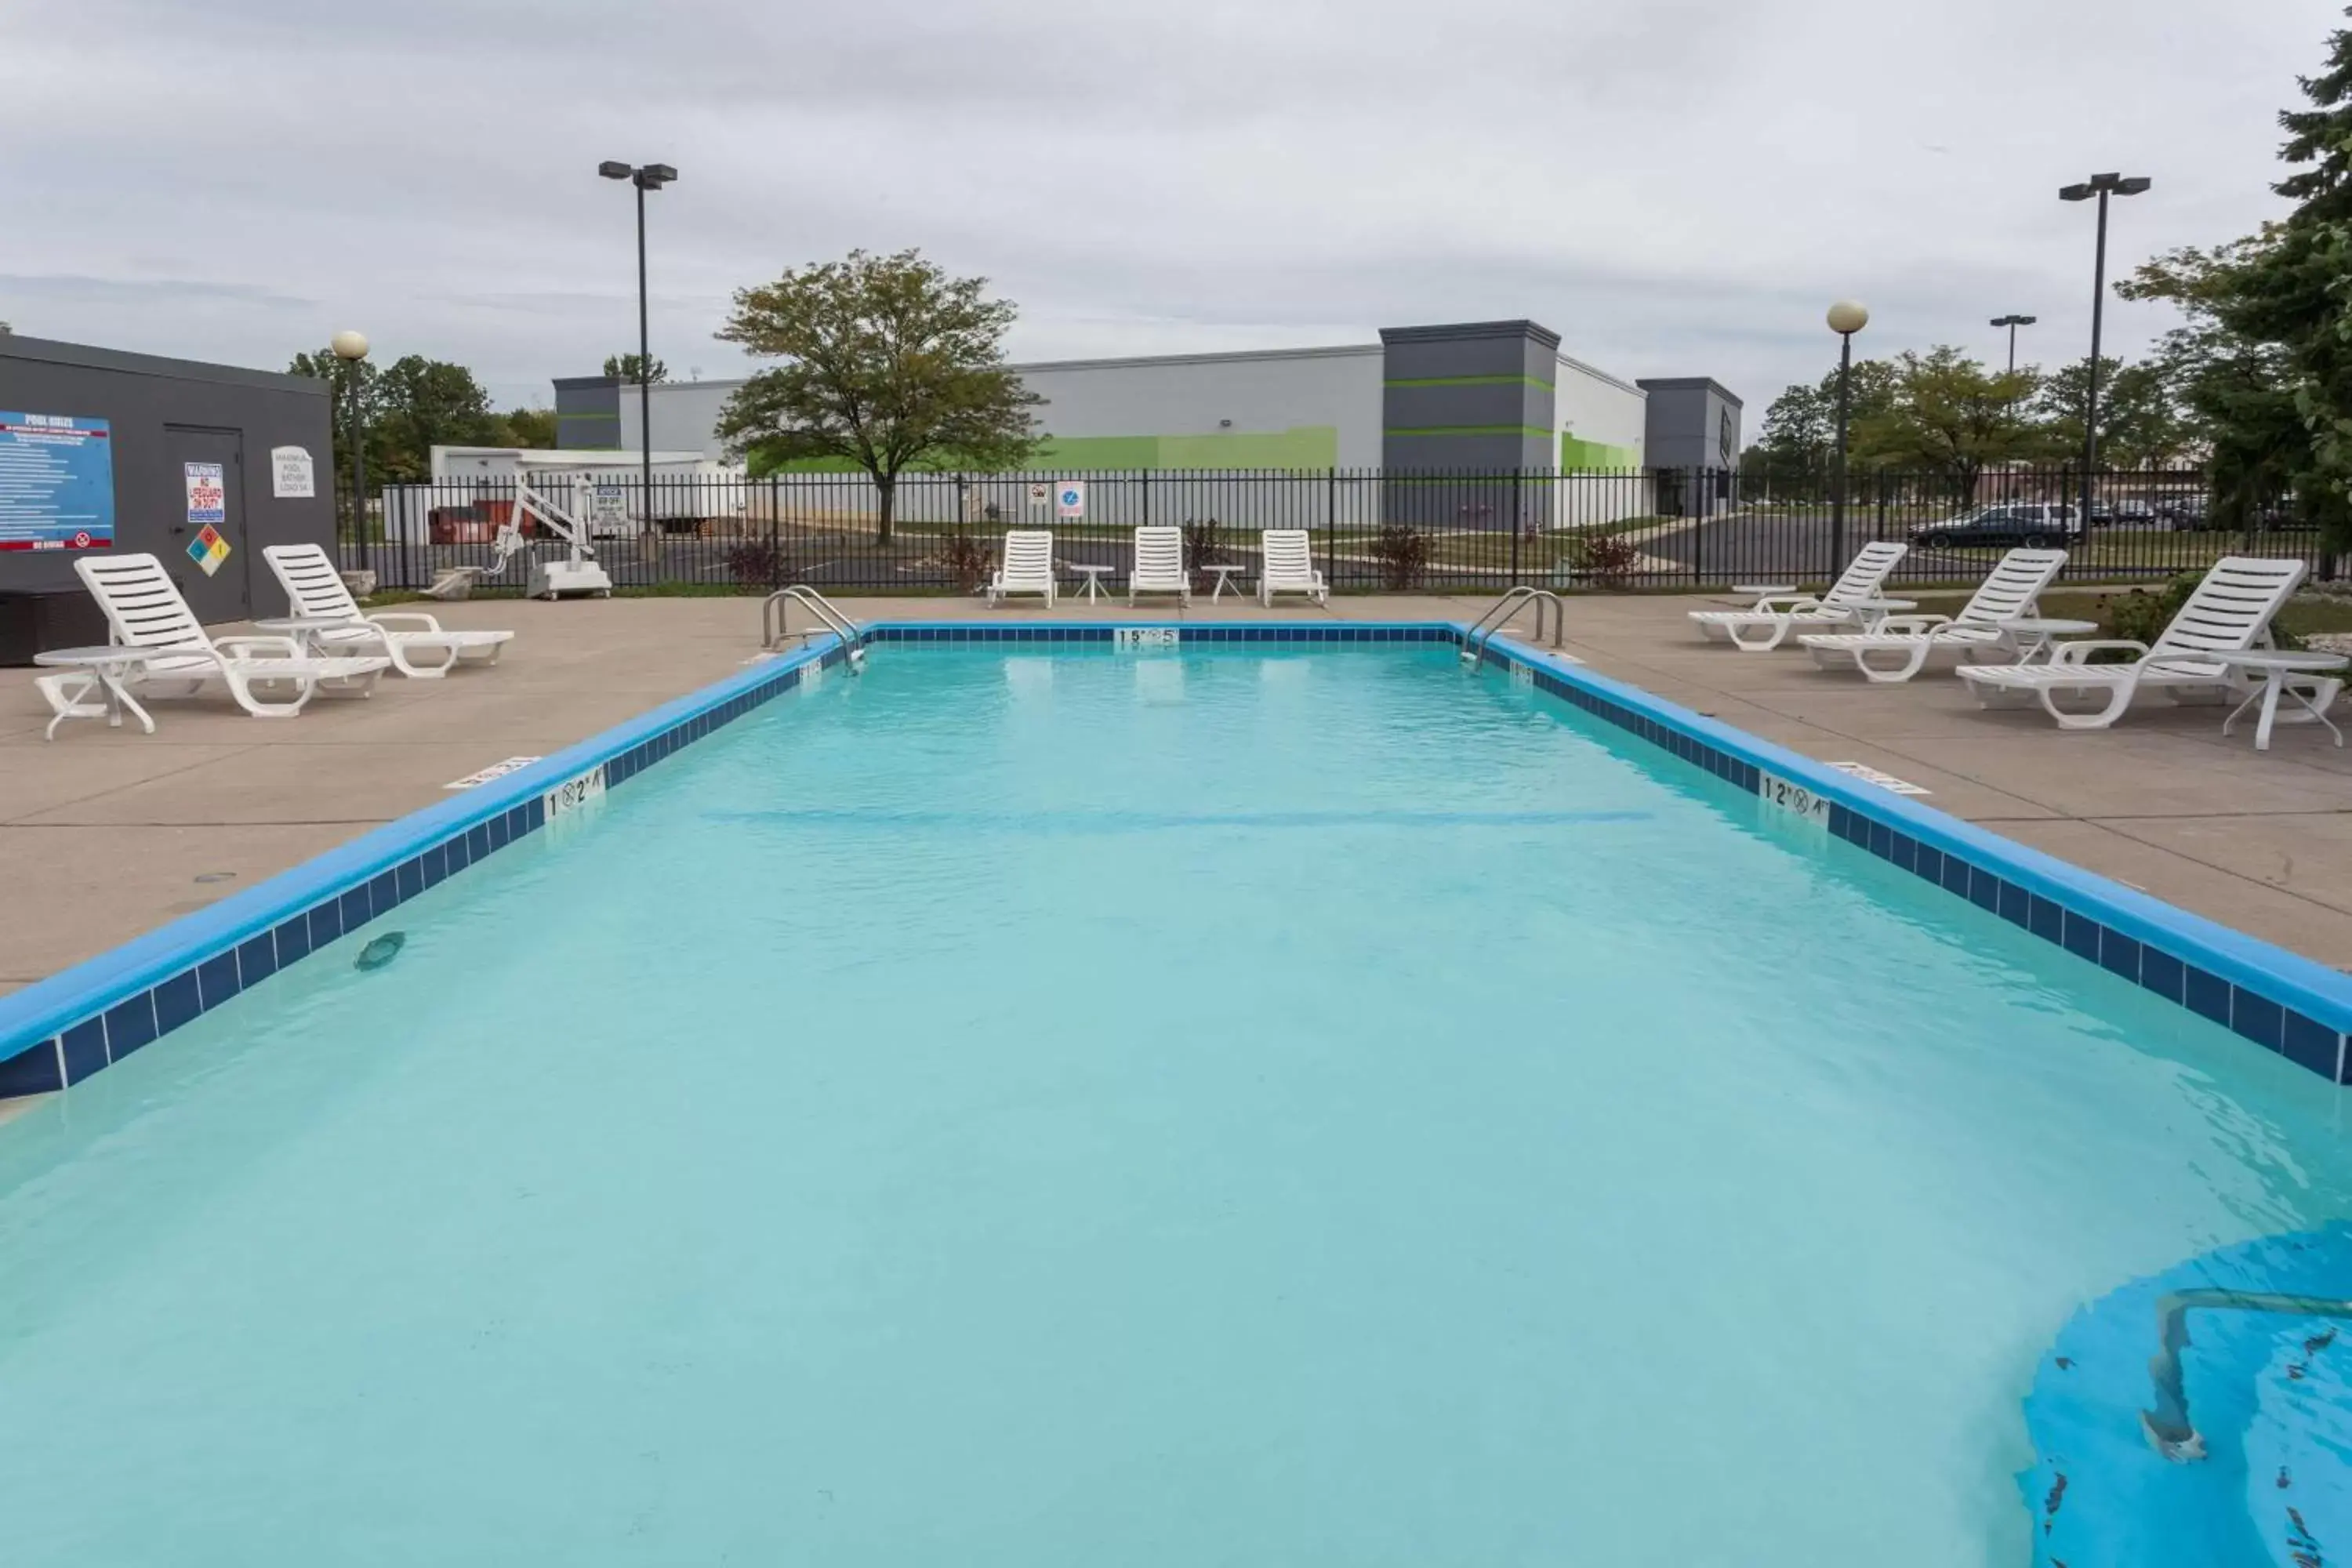 On site, Swimming Pool in Best Western Fishers Indianapolis